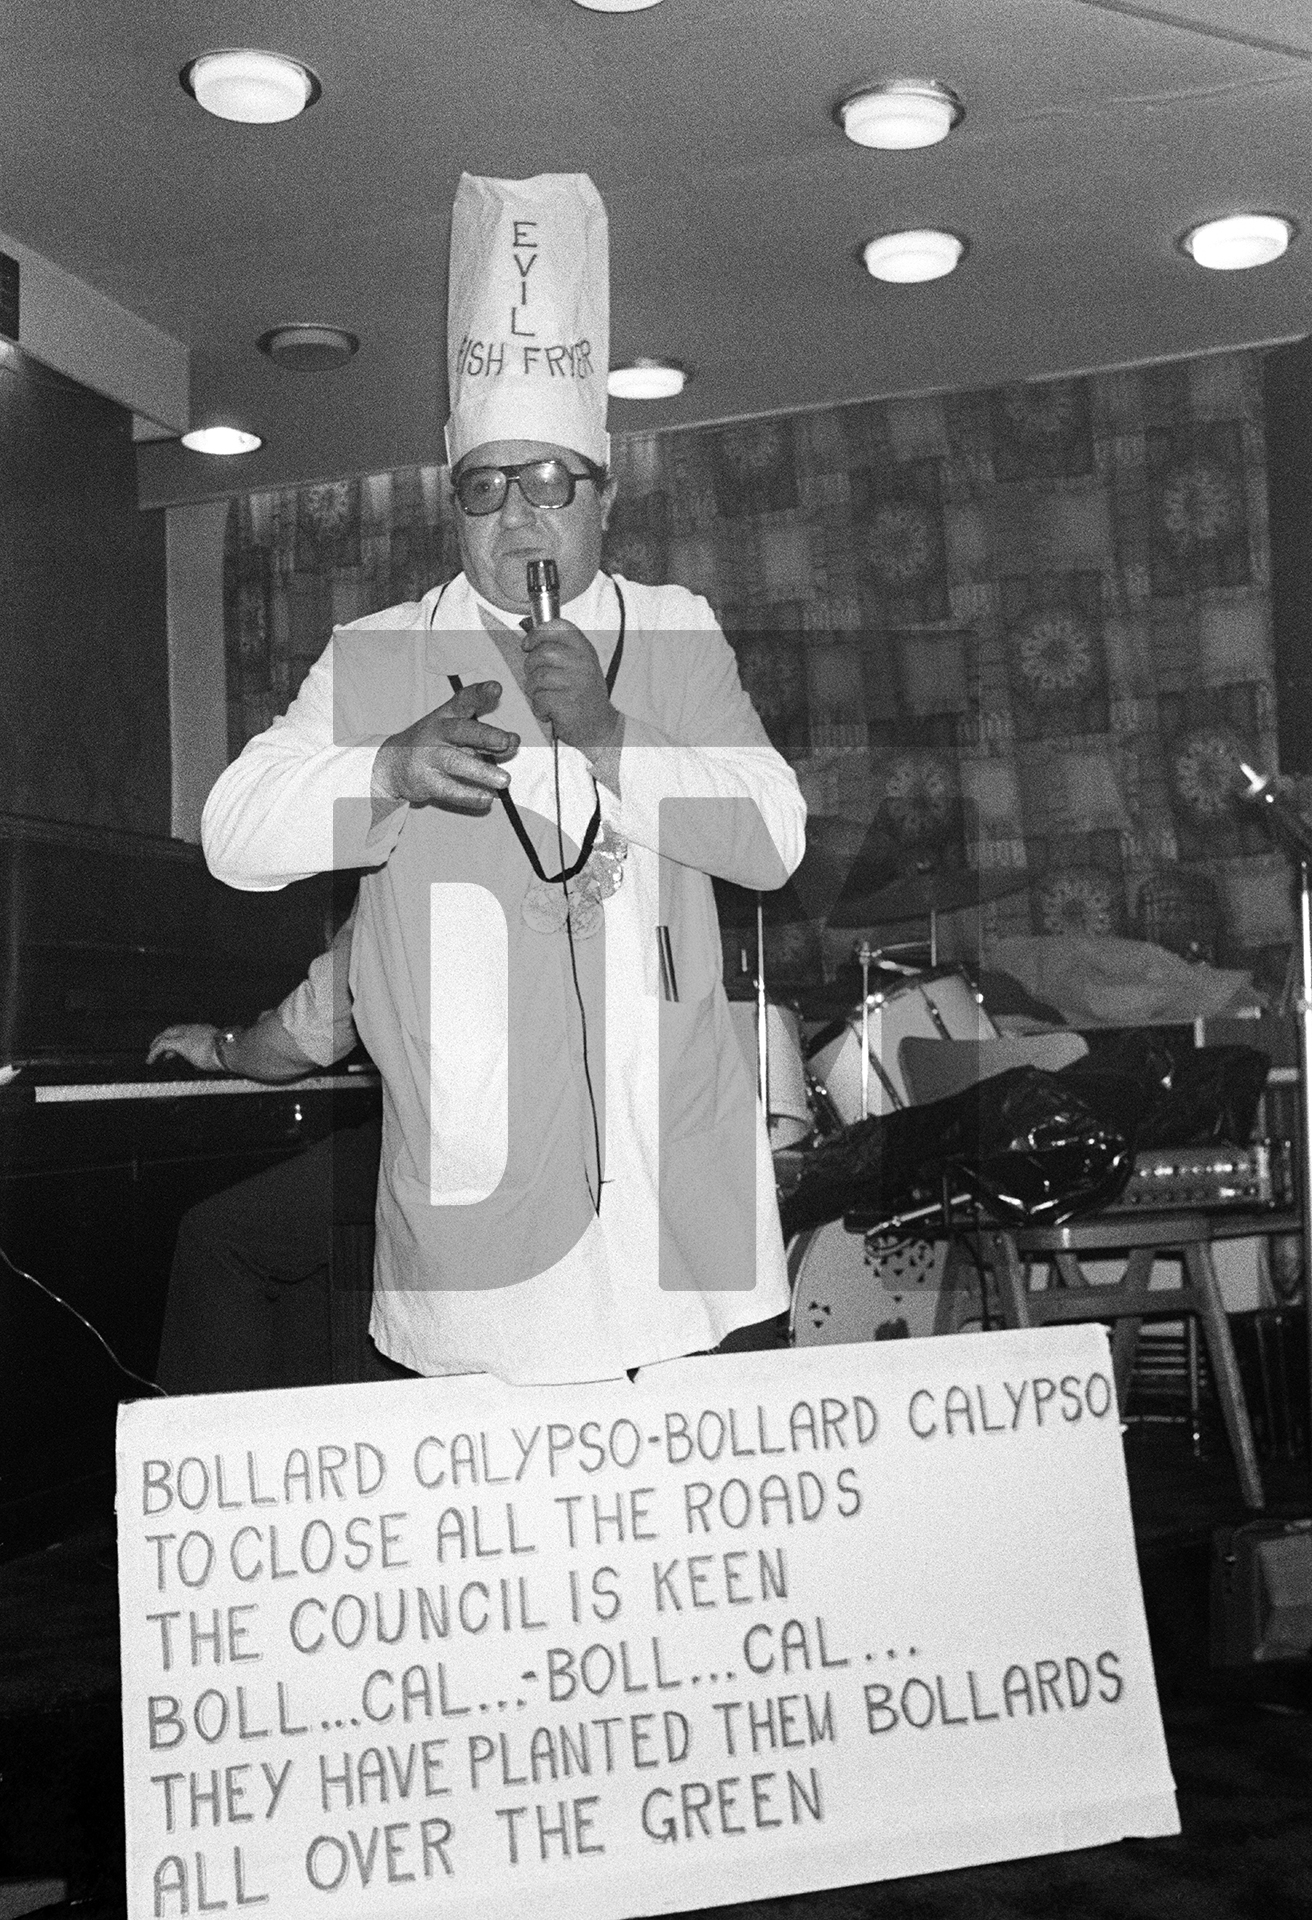 Italo ‘Roy’ Rigali, singing his 'Bollard Calypso' — a protest song against parking restrictions imposed on customers at his fish and chip shop — in a working men's club, Easington Village, Co. Durham. September 1974 by Daniel Meadows